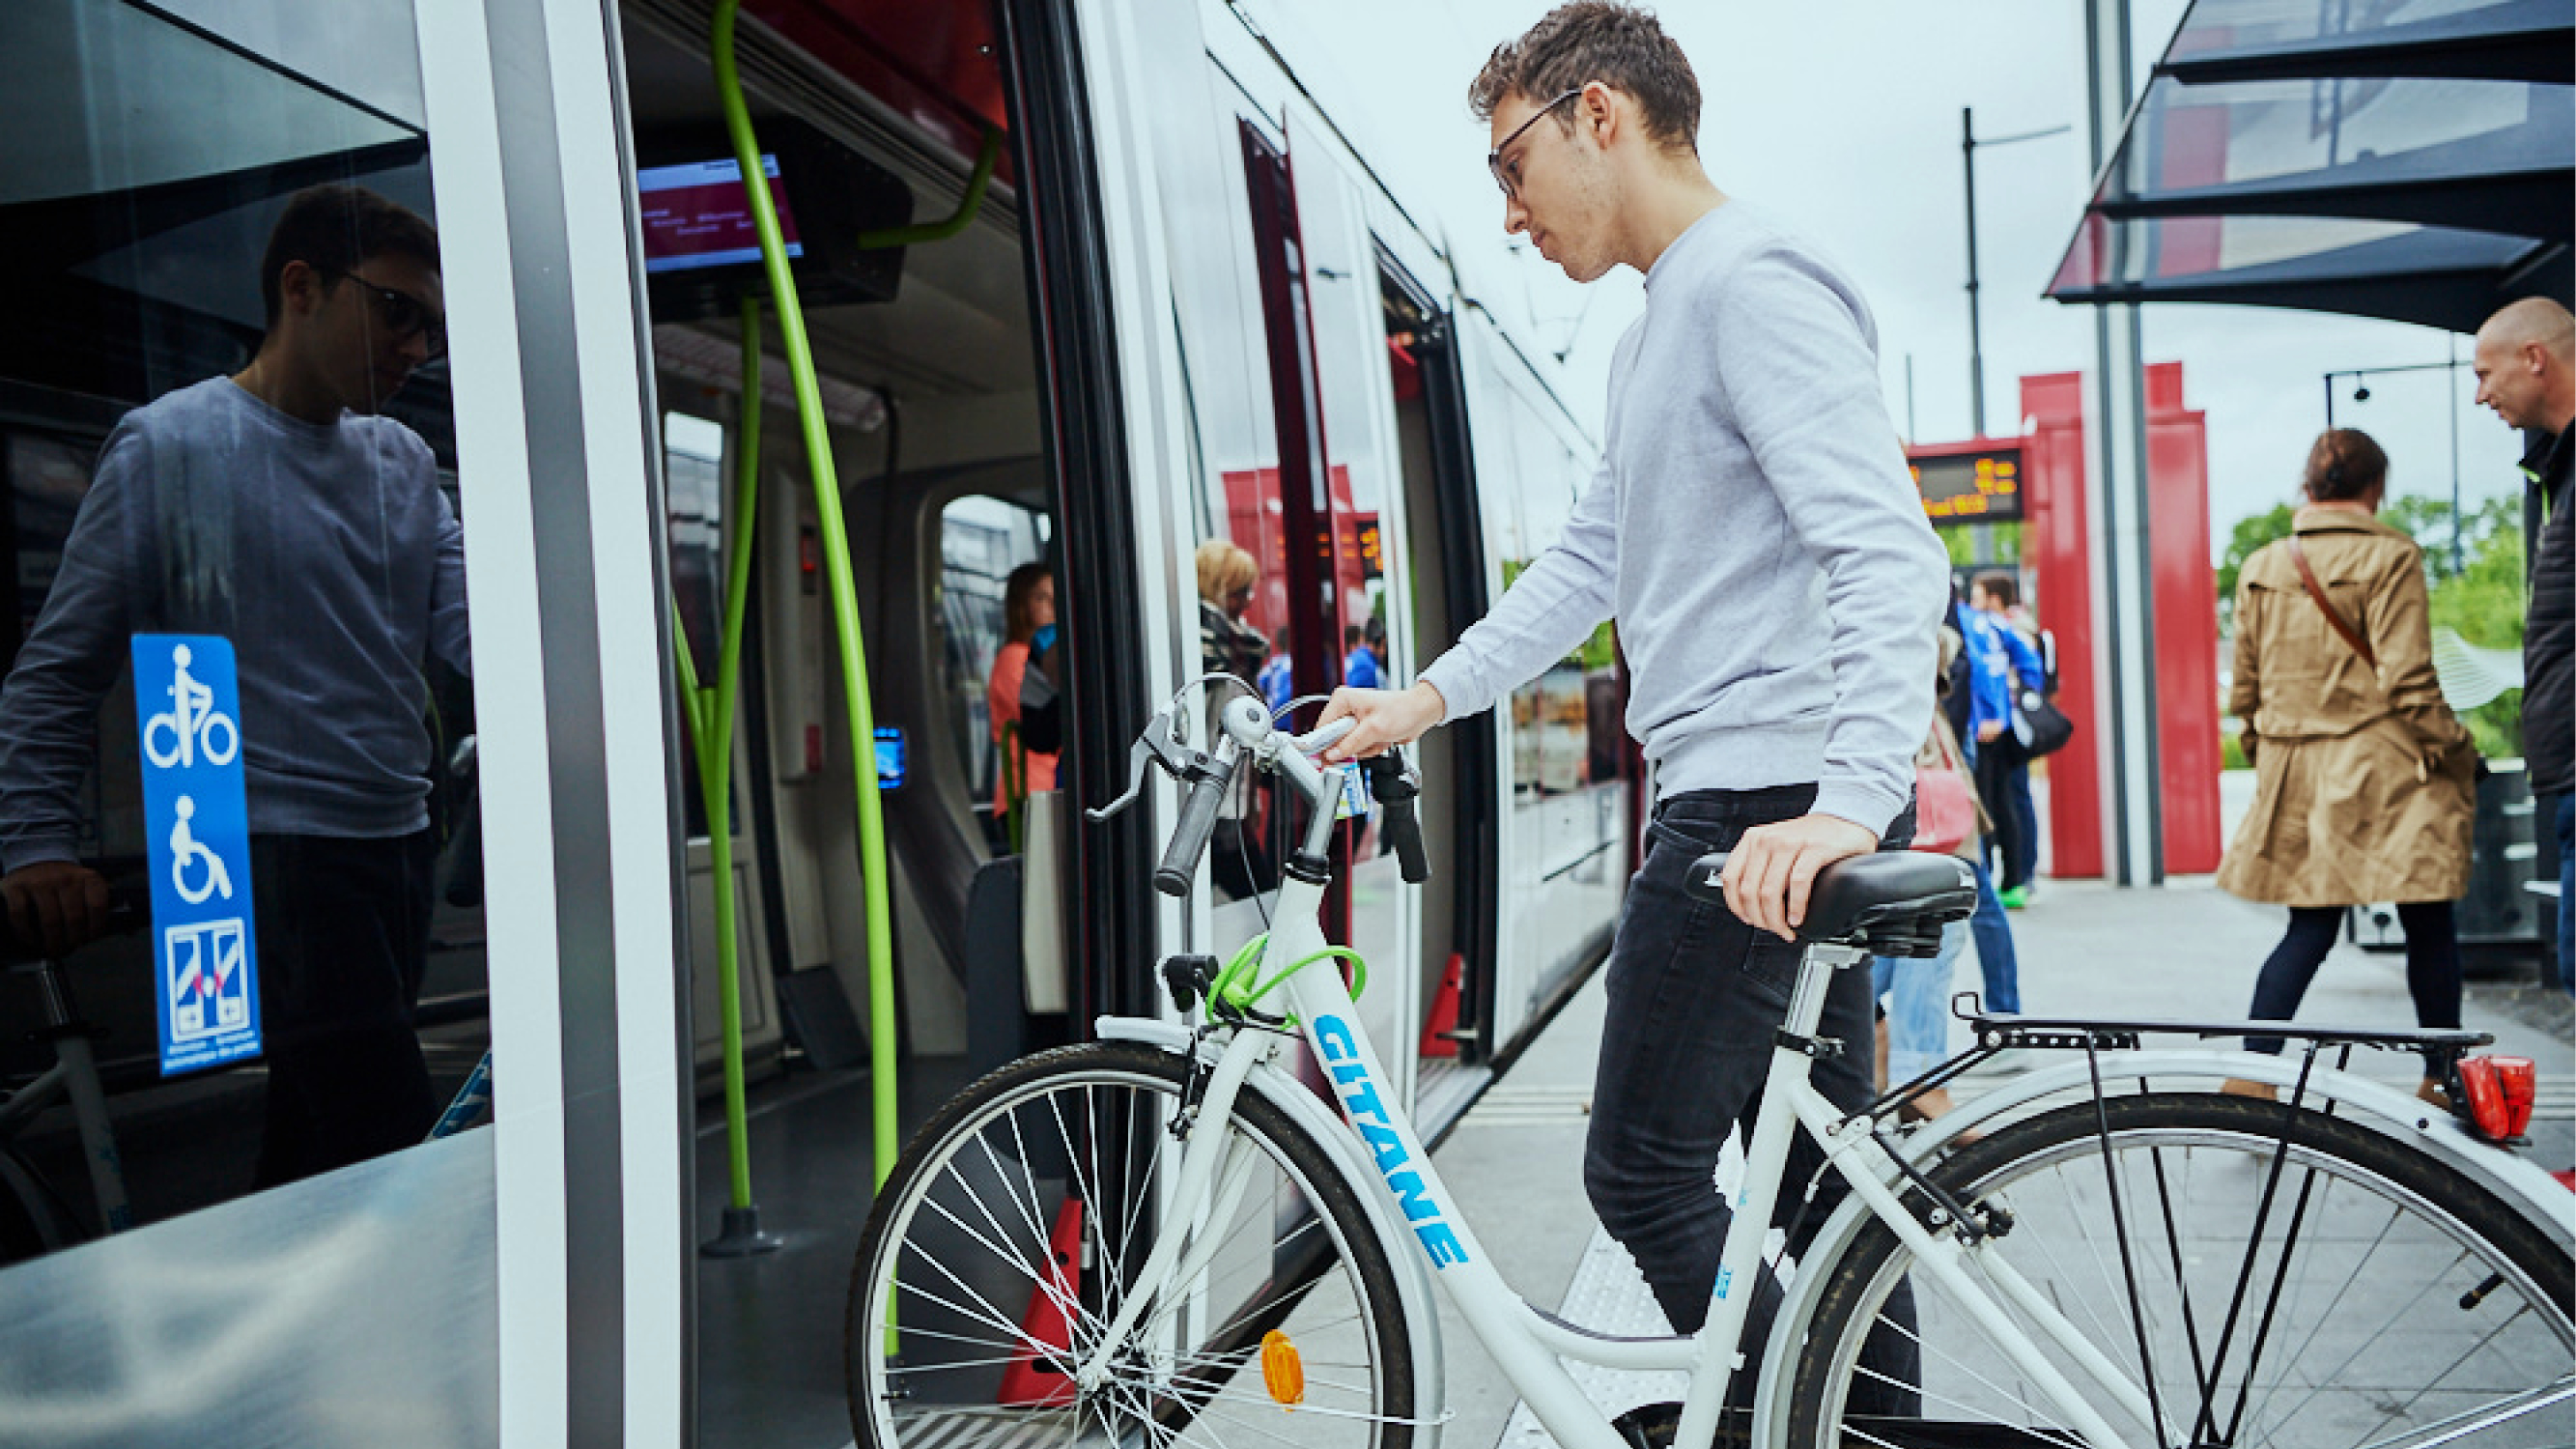 promote travel by bicycle and tram